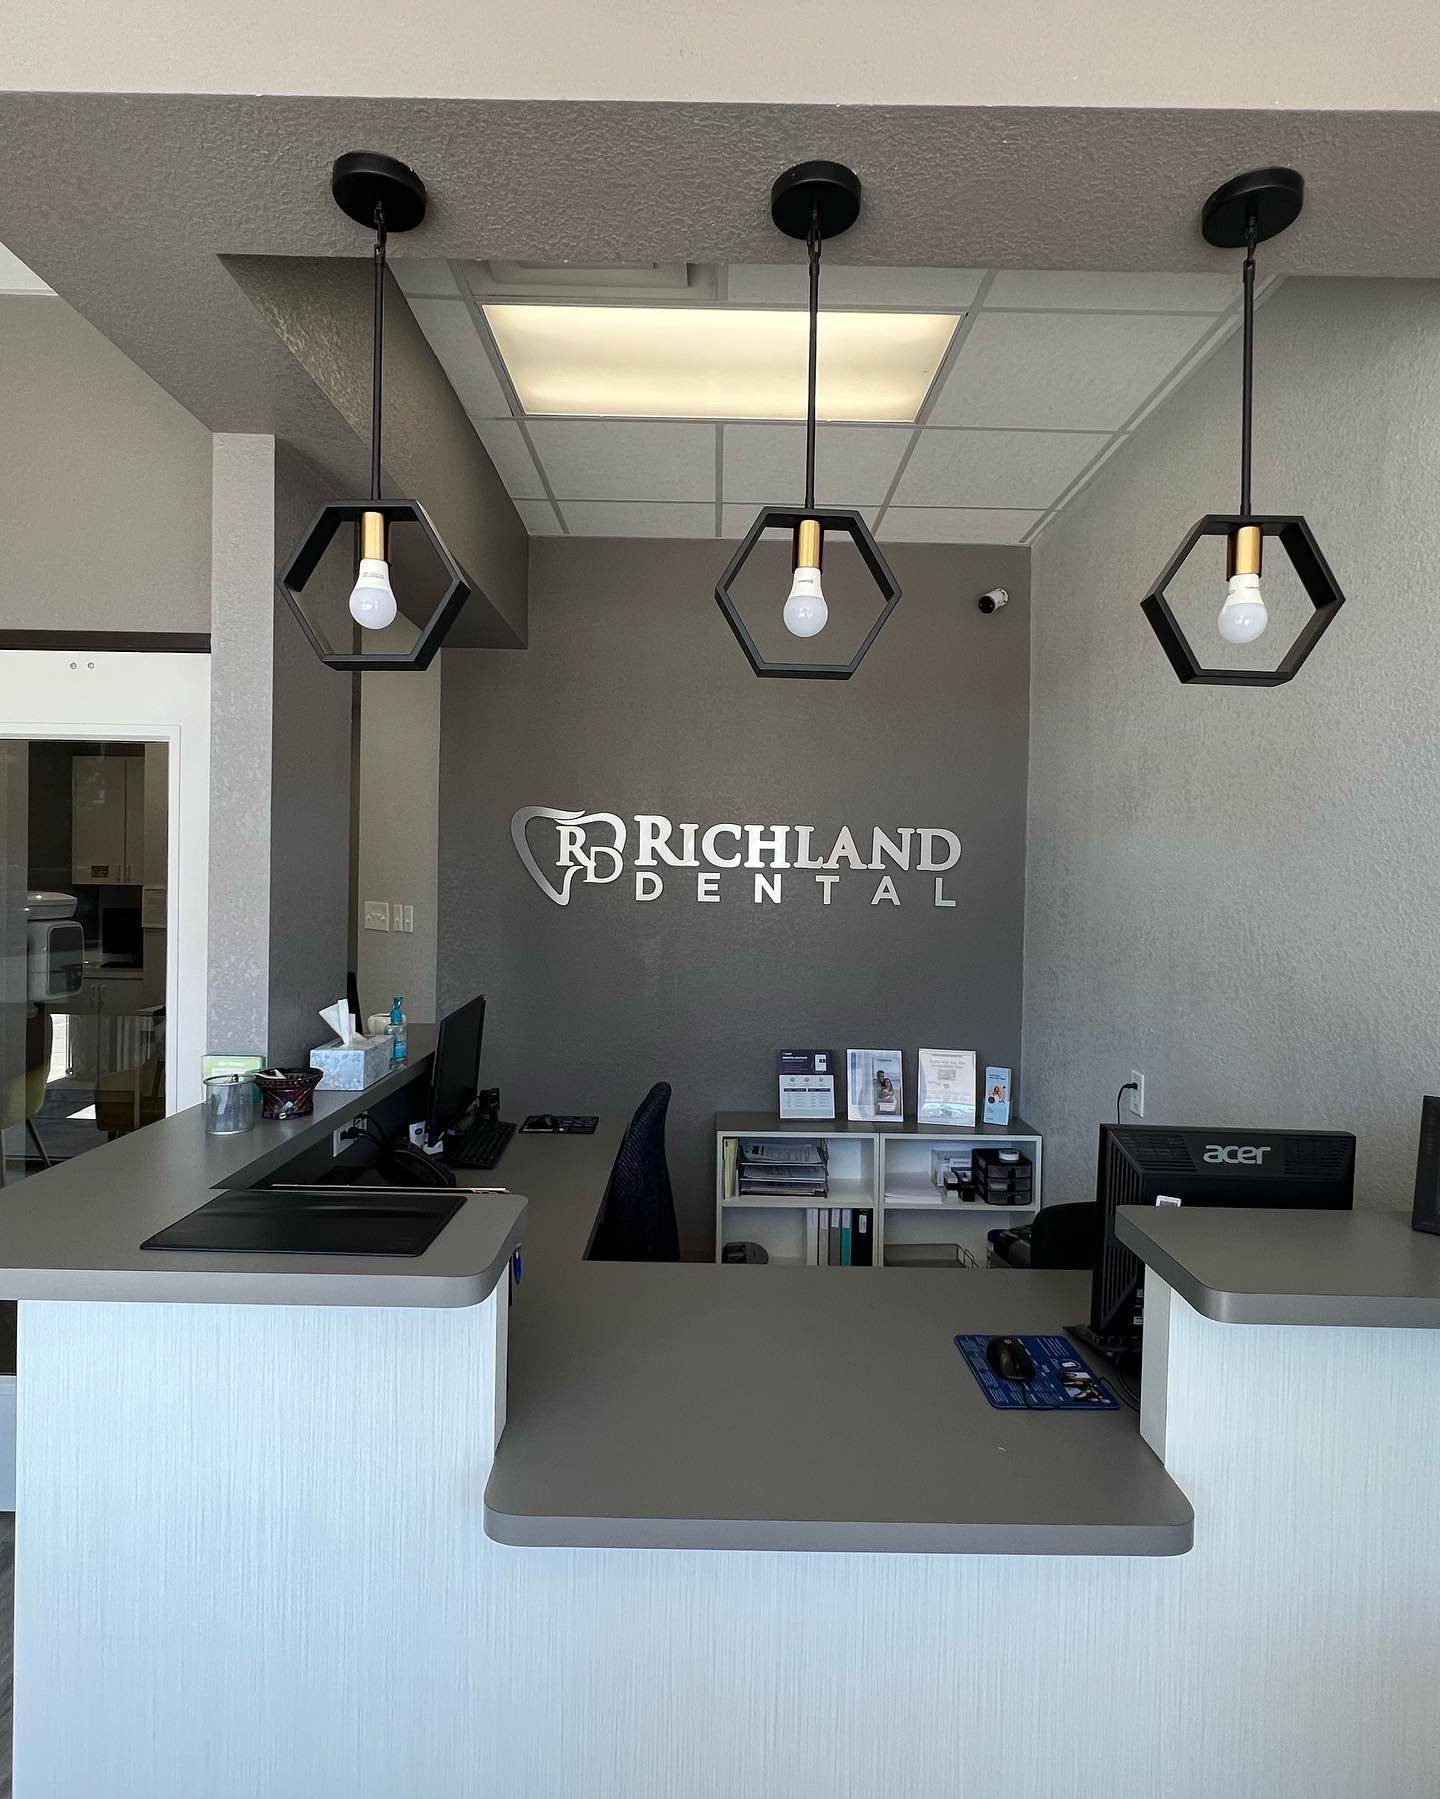 Richland Dental sign on wall of dental office in Richardson Texas